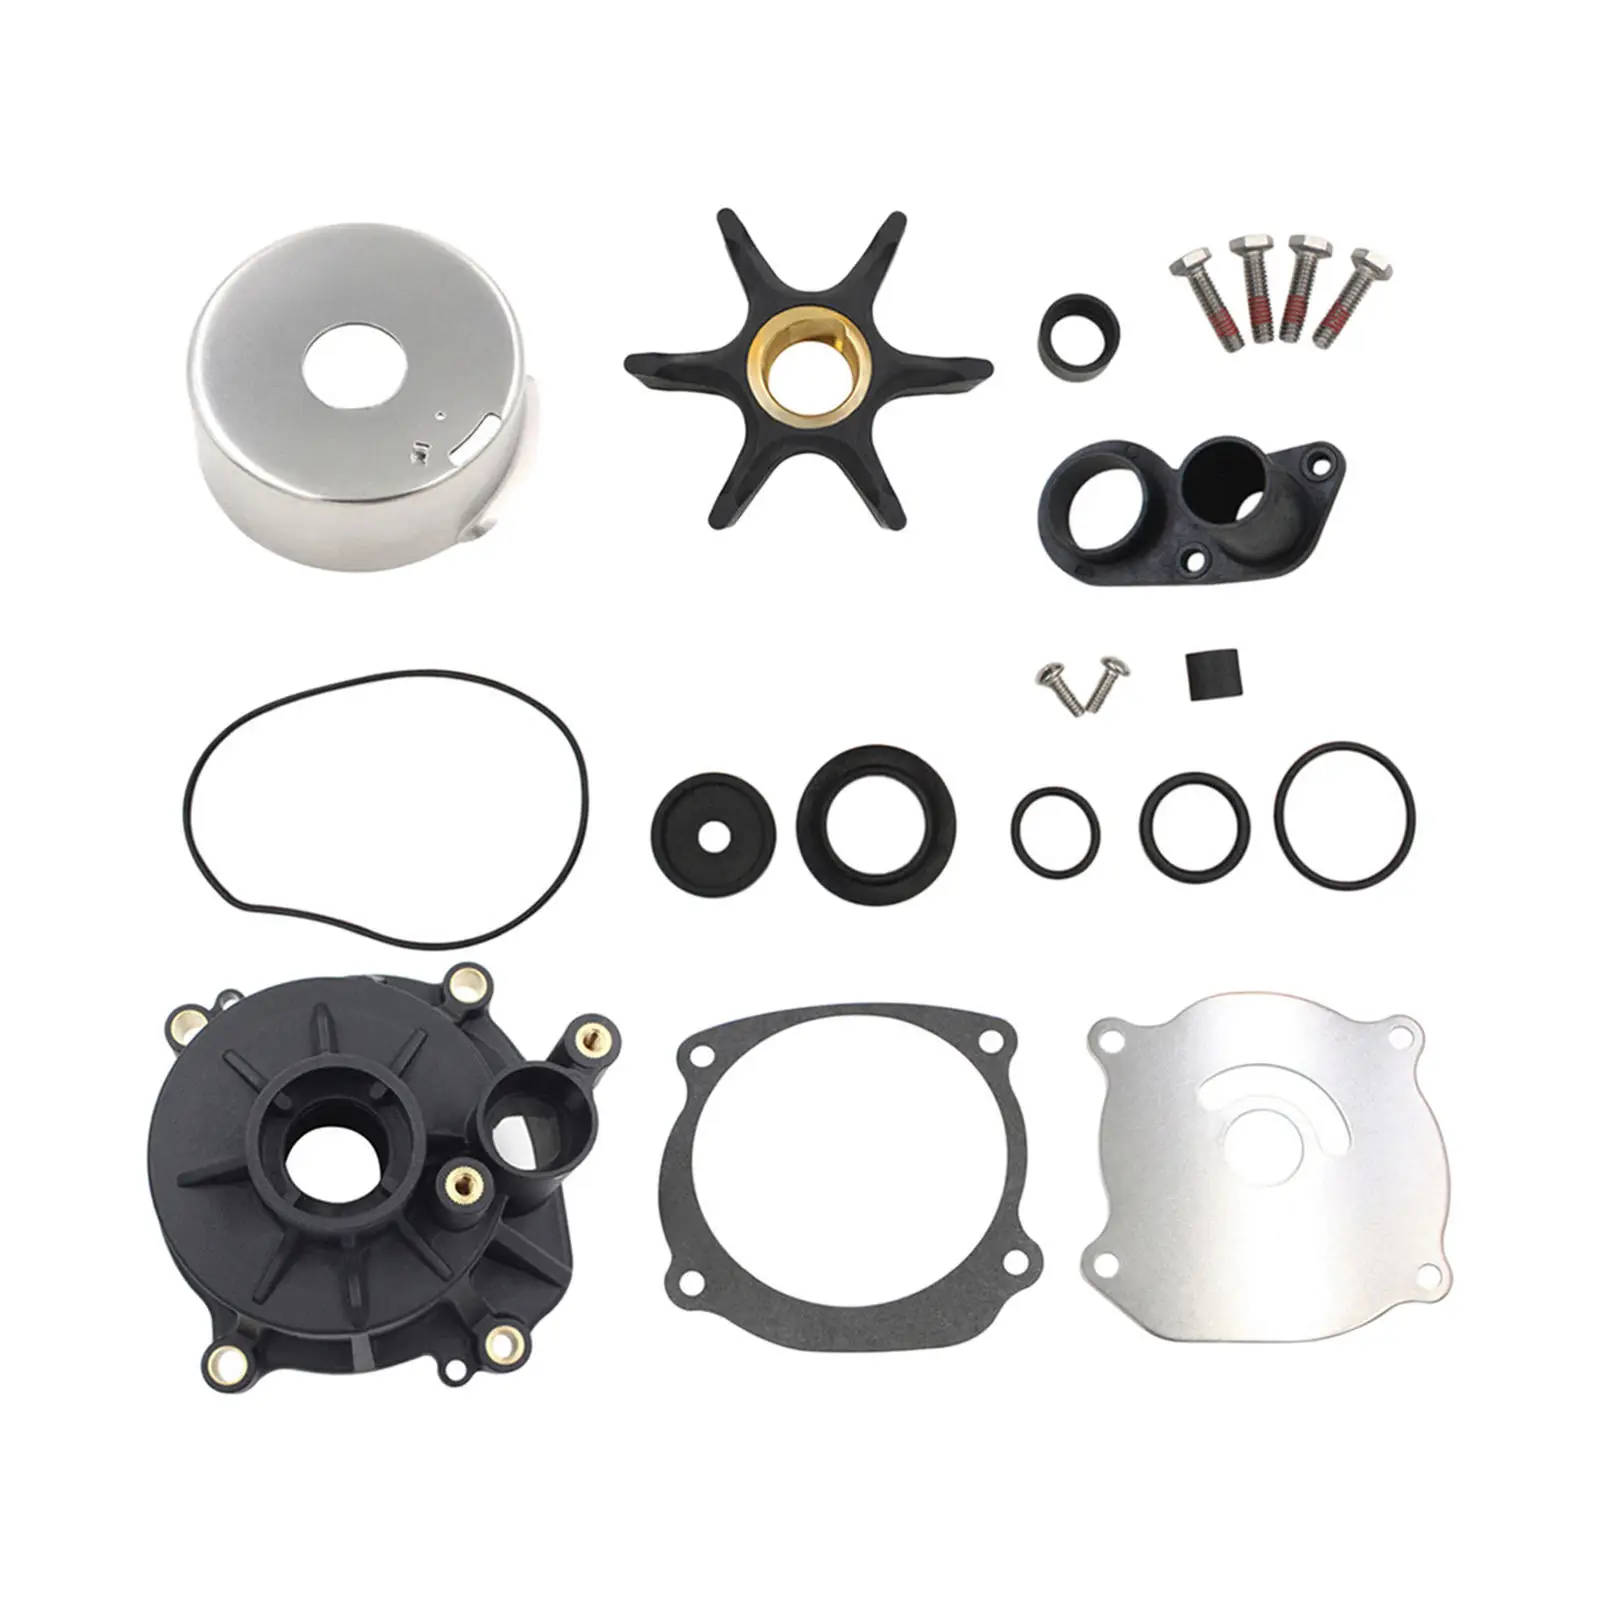 Water Pump Kit fits for Johnson Evinrude Outboard 5001594 85-300HP, Lightweight High Performance